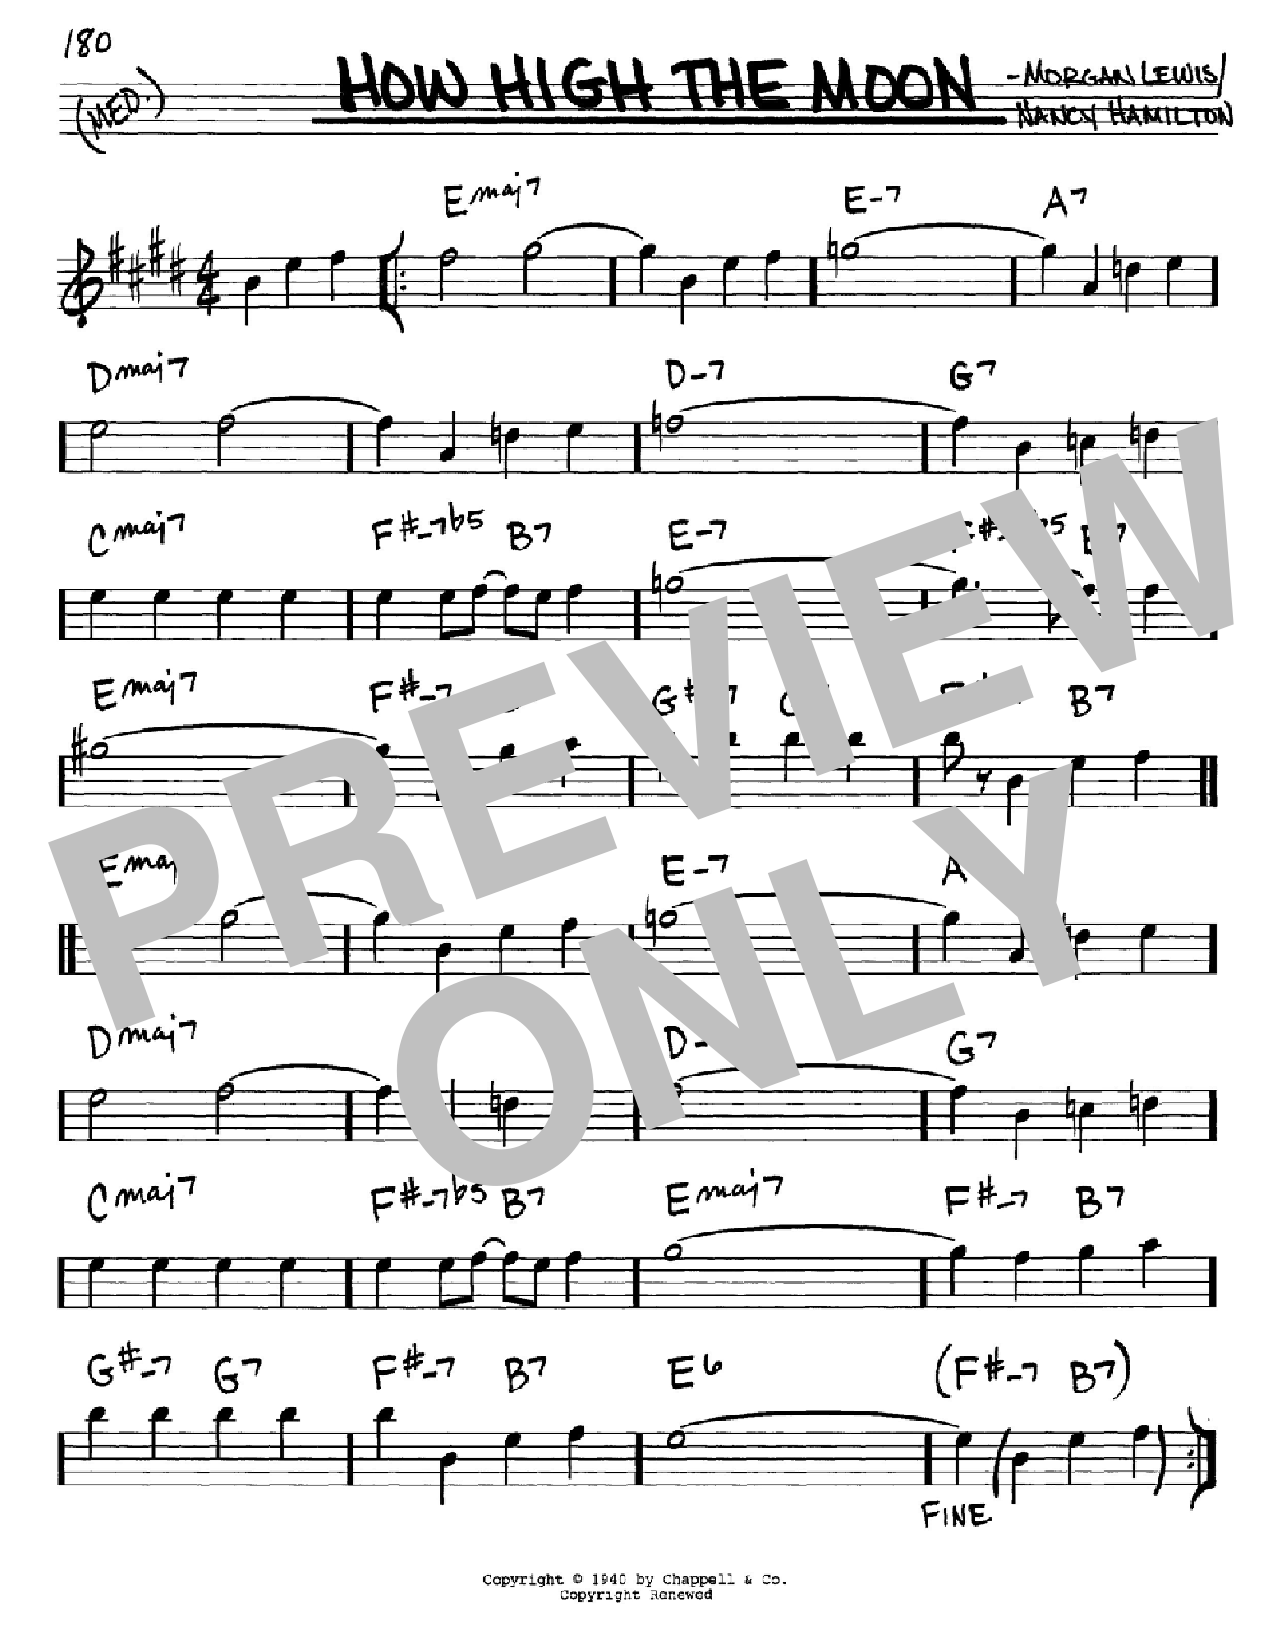 Download Les Paul How High The Moon Sheet Music